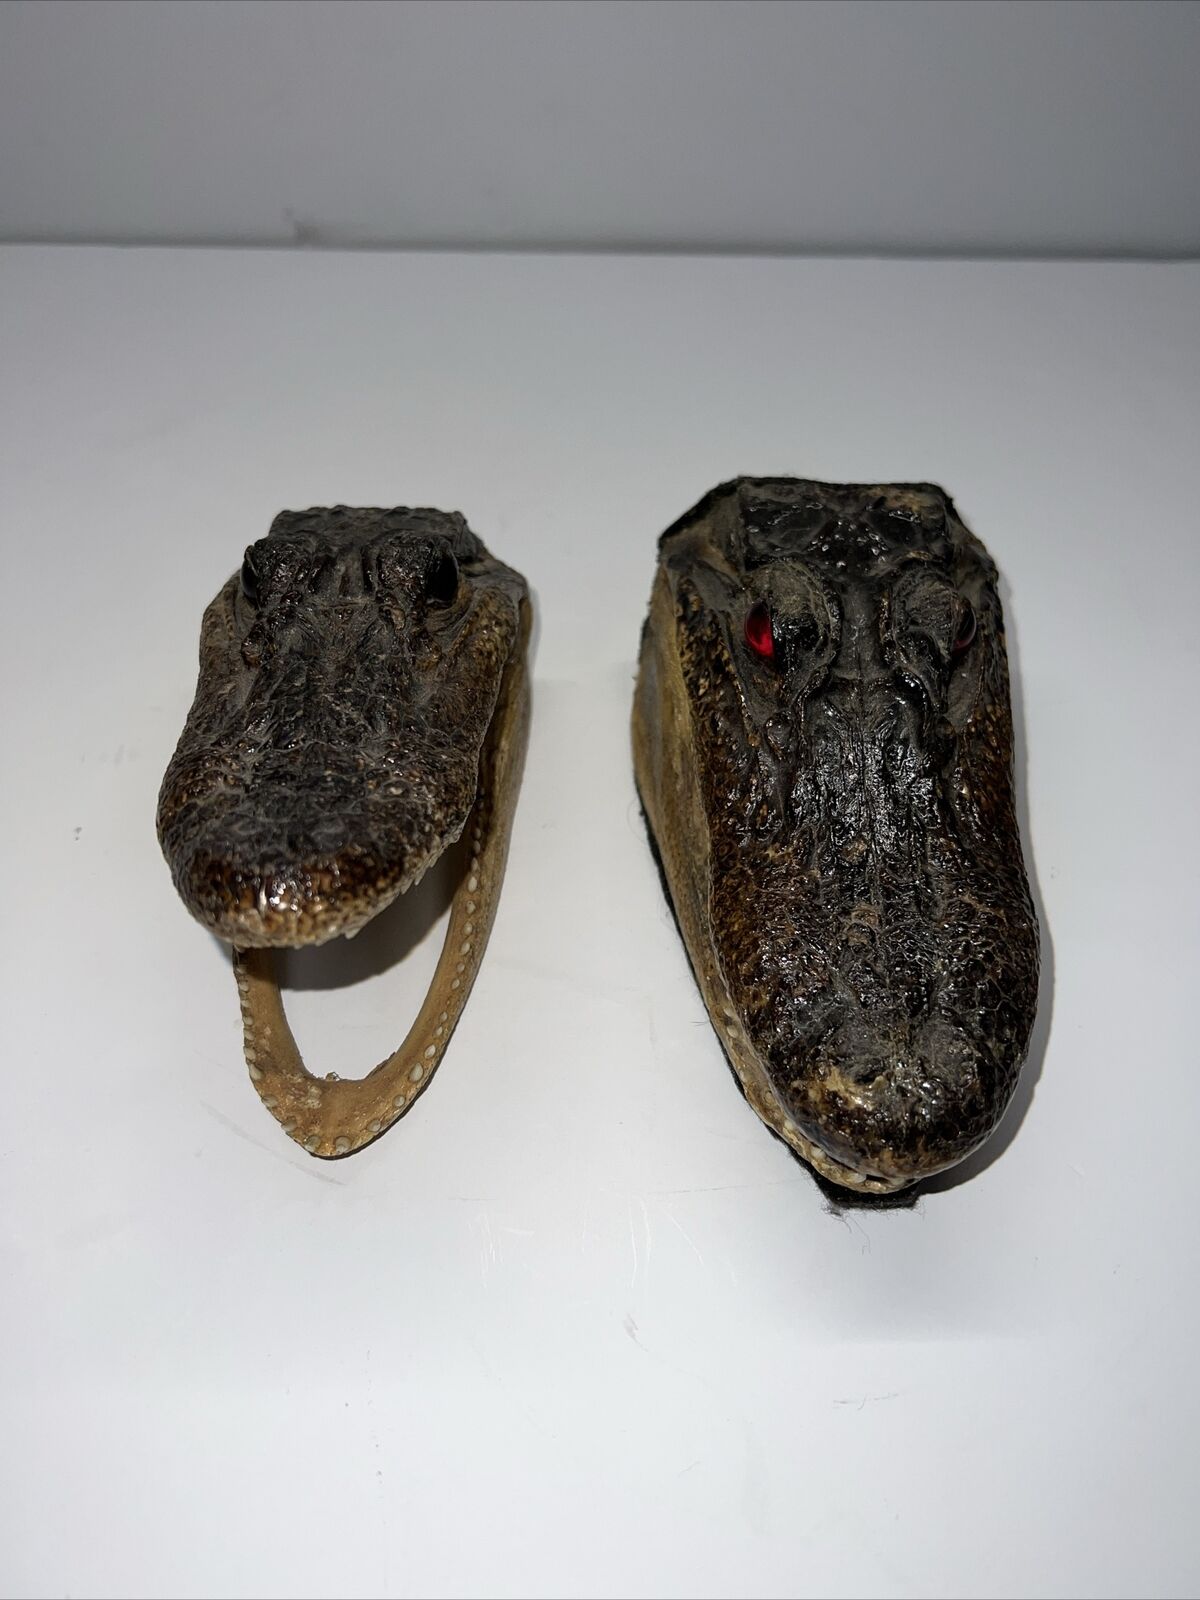 Two Alligator Heads, 6-7 Inches